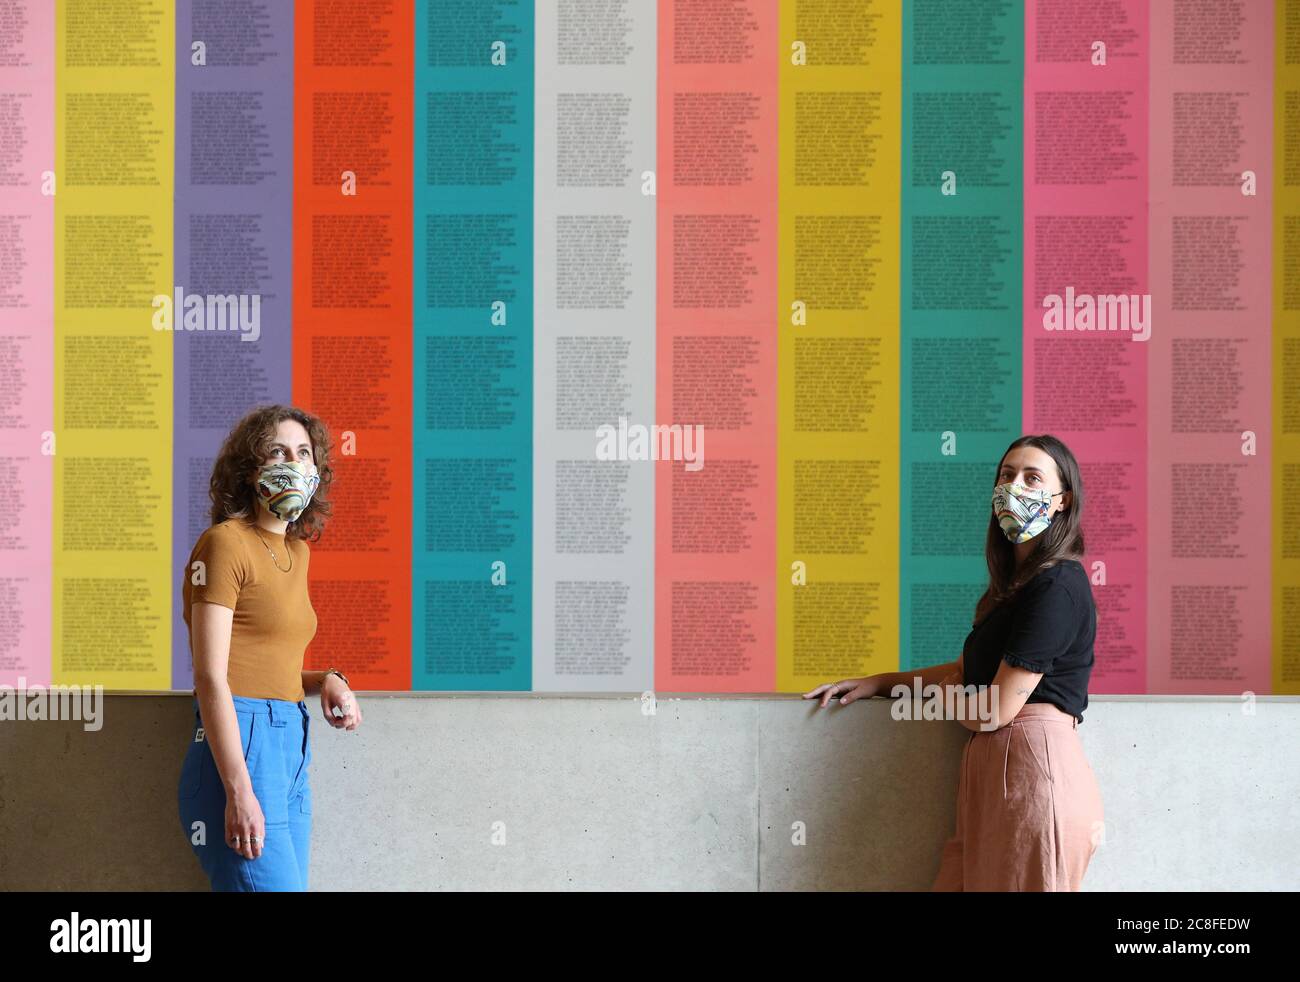 Members of staff wear artwork inspired masks as they stand in front of Jenny Holzer's 'Inflammatory Essays' at the Tate Modern as the gallery prepares to reopen to the public on Monday July 27 following the coronavirus lockdown. Stock Photo